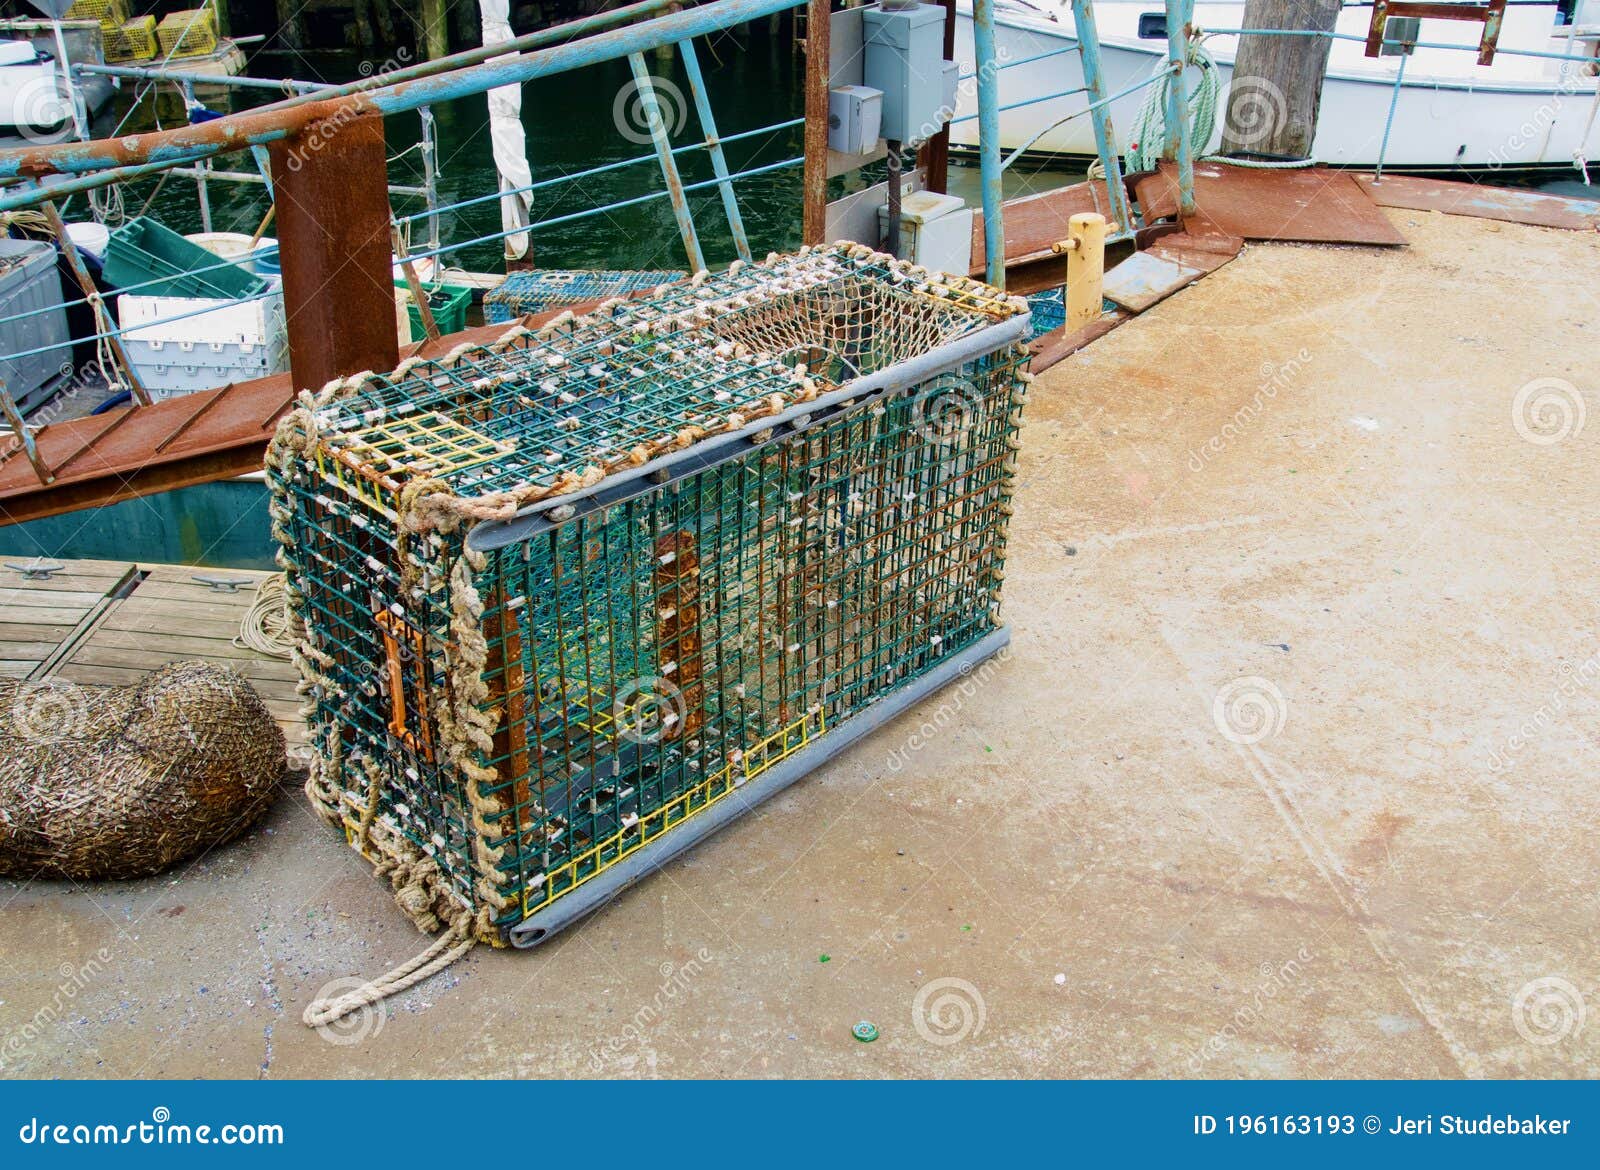 Real Wire Lobster Trap in Situ on Dock of a Wharf Stock Image